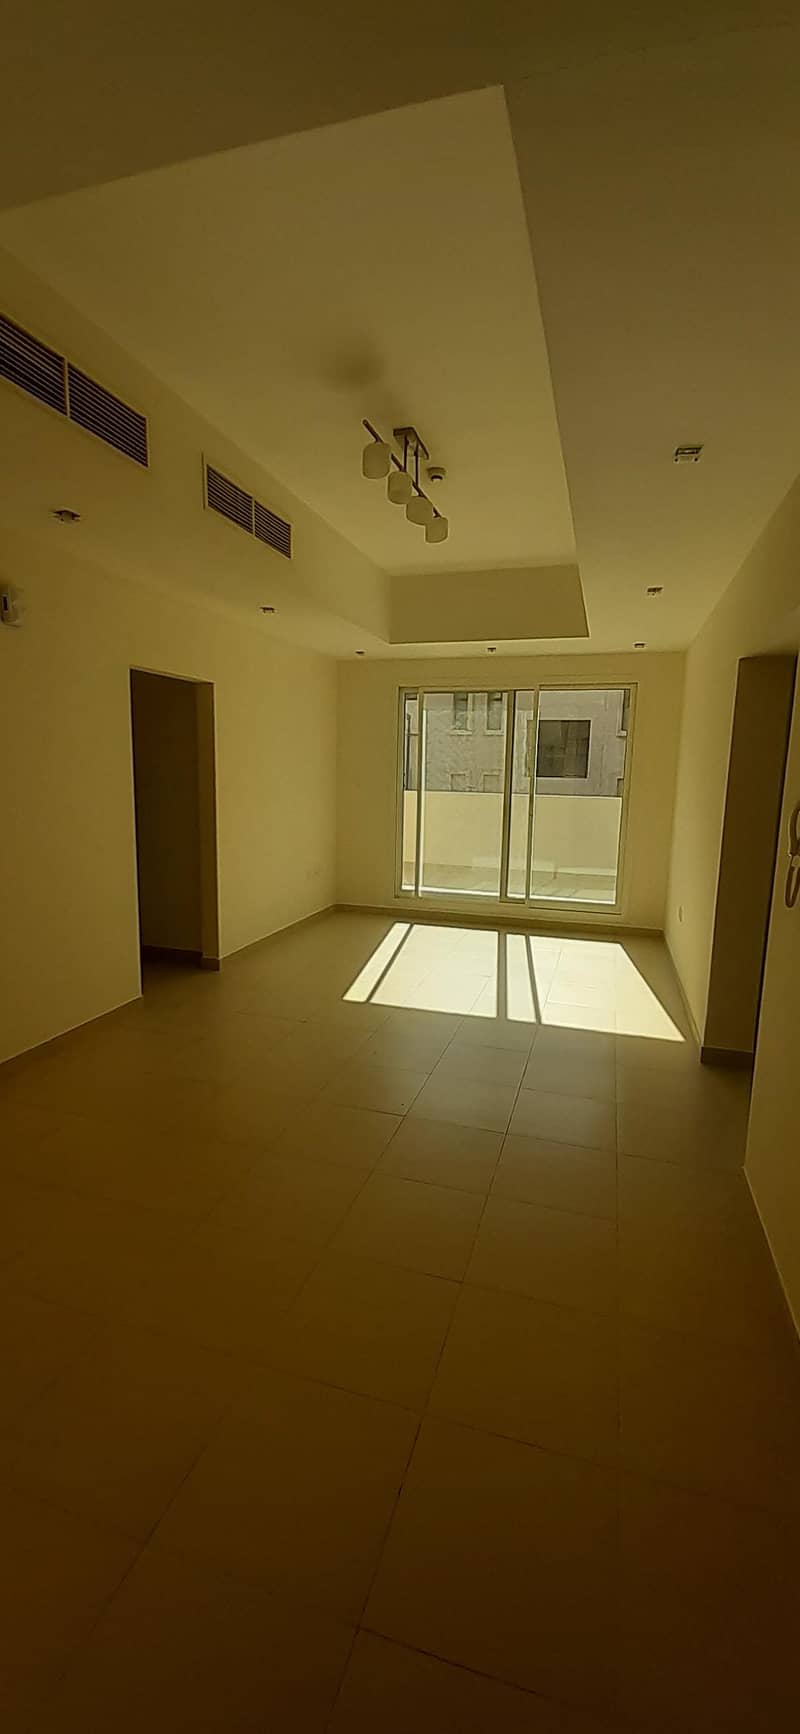 3 BED/HALL WIT ATTACHED BATH  APARTMENT in AL WARQAA 1, DUBAI for RENT only 60k